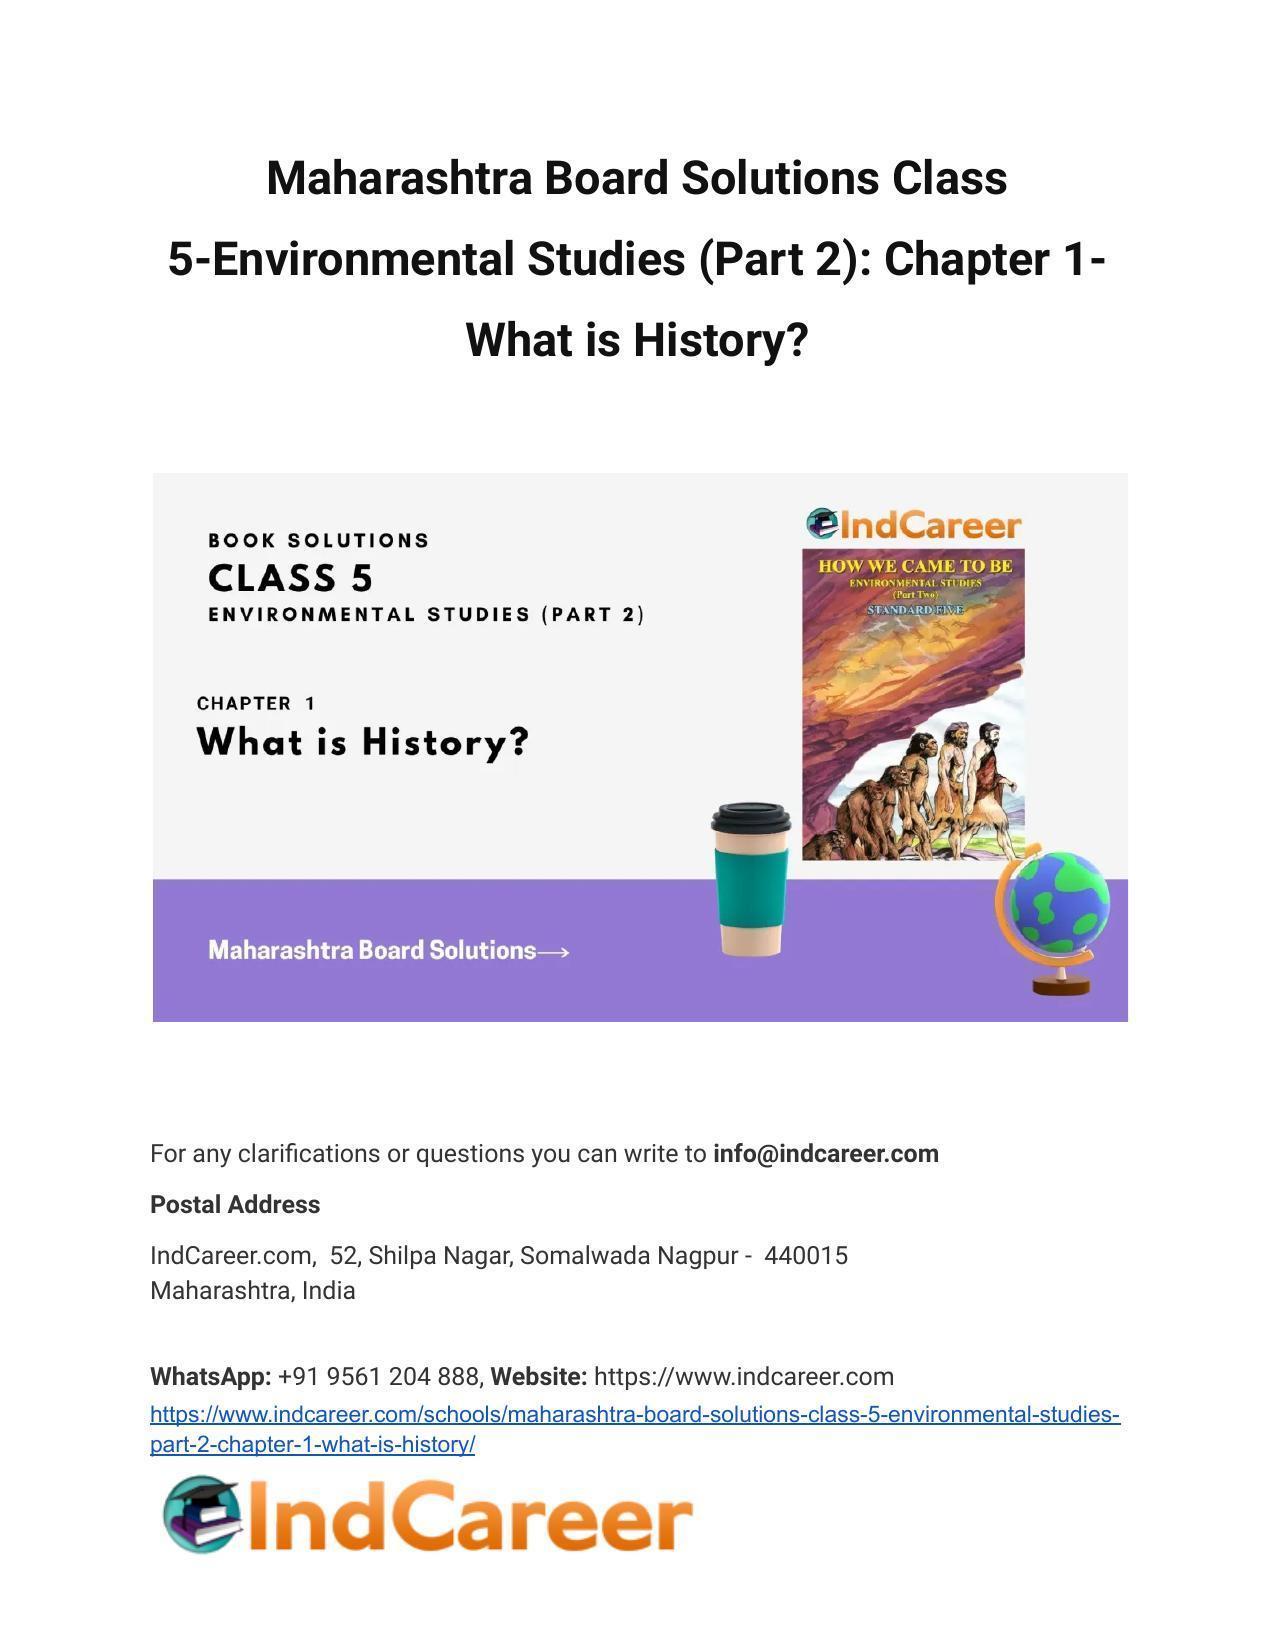 Maharashtra Board Solutions Class 5-Environmental Studies (Part 2): Chapter 1- What is History? - Page 1